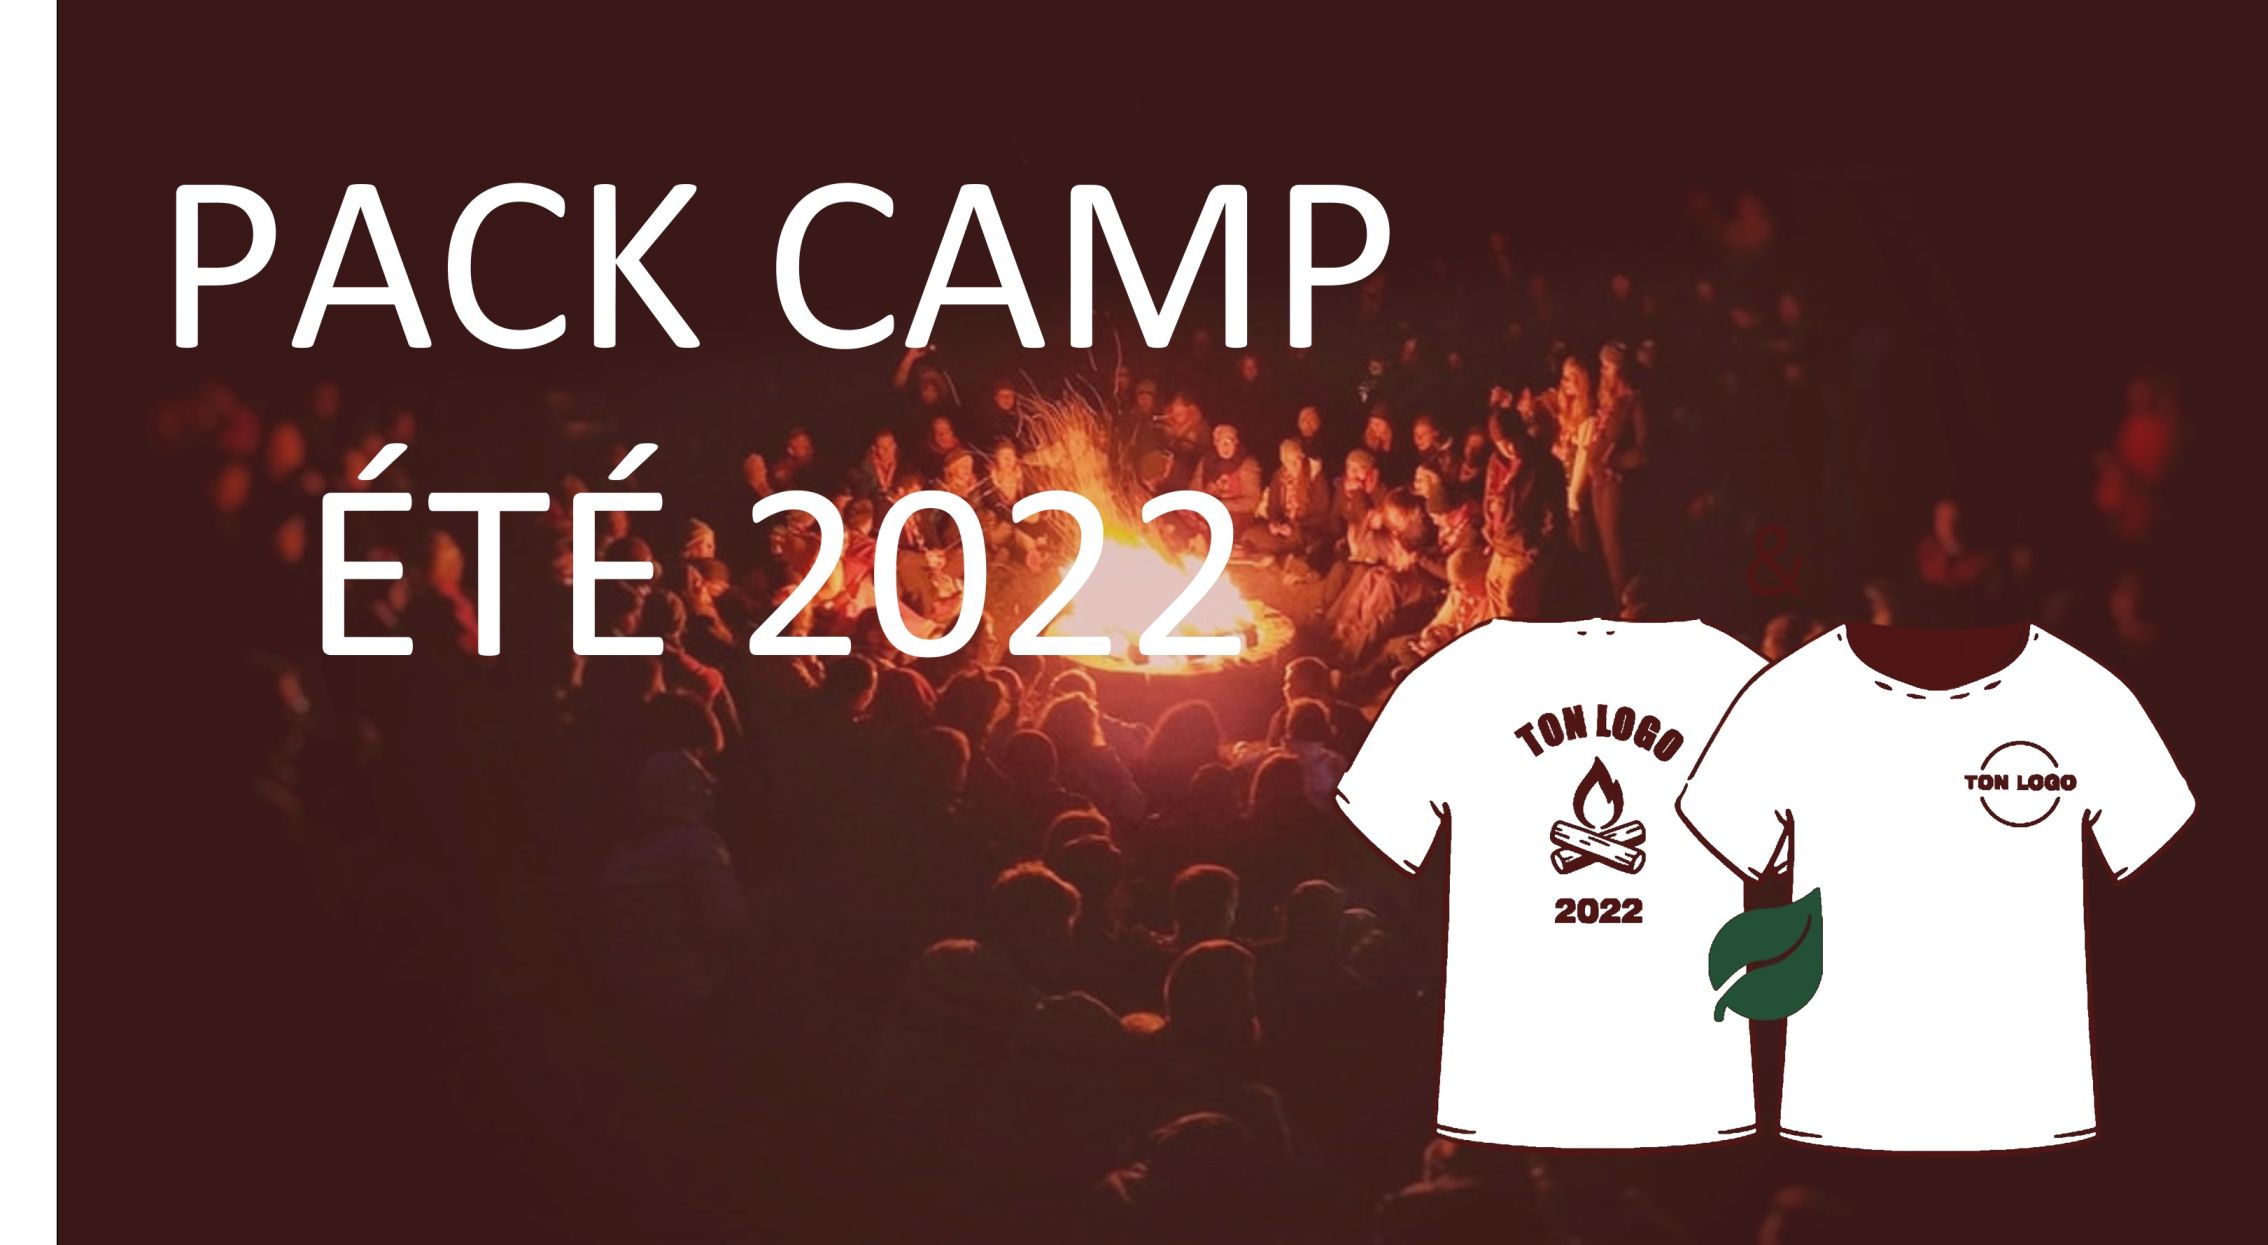 Pack Camps Scout ete 2022